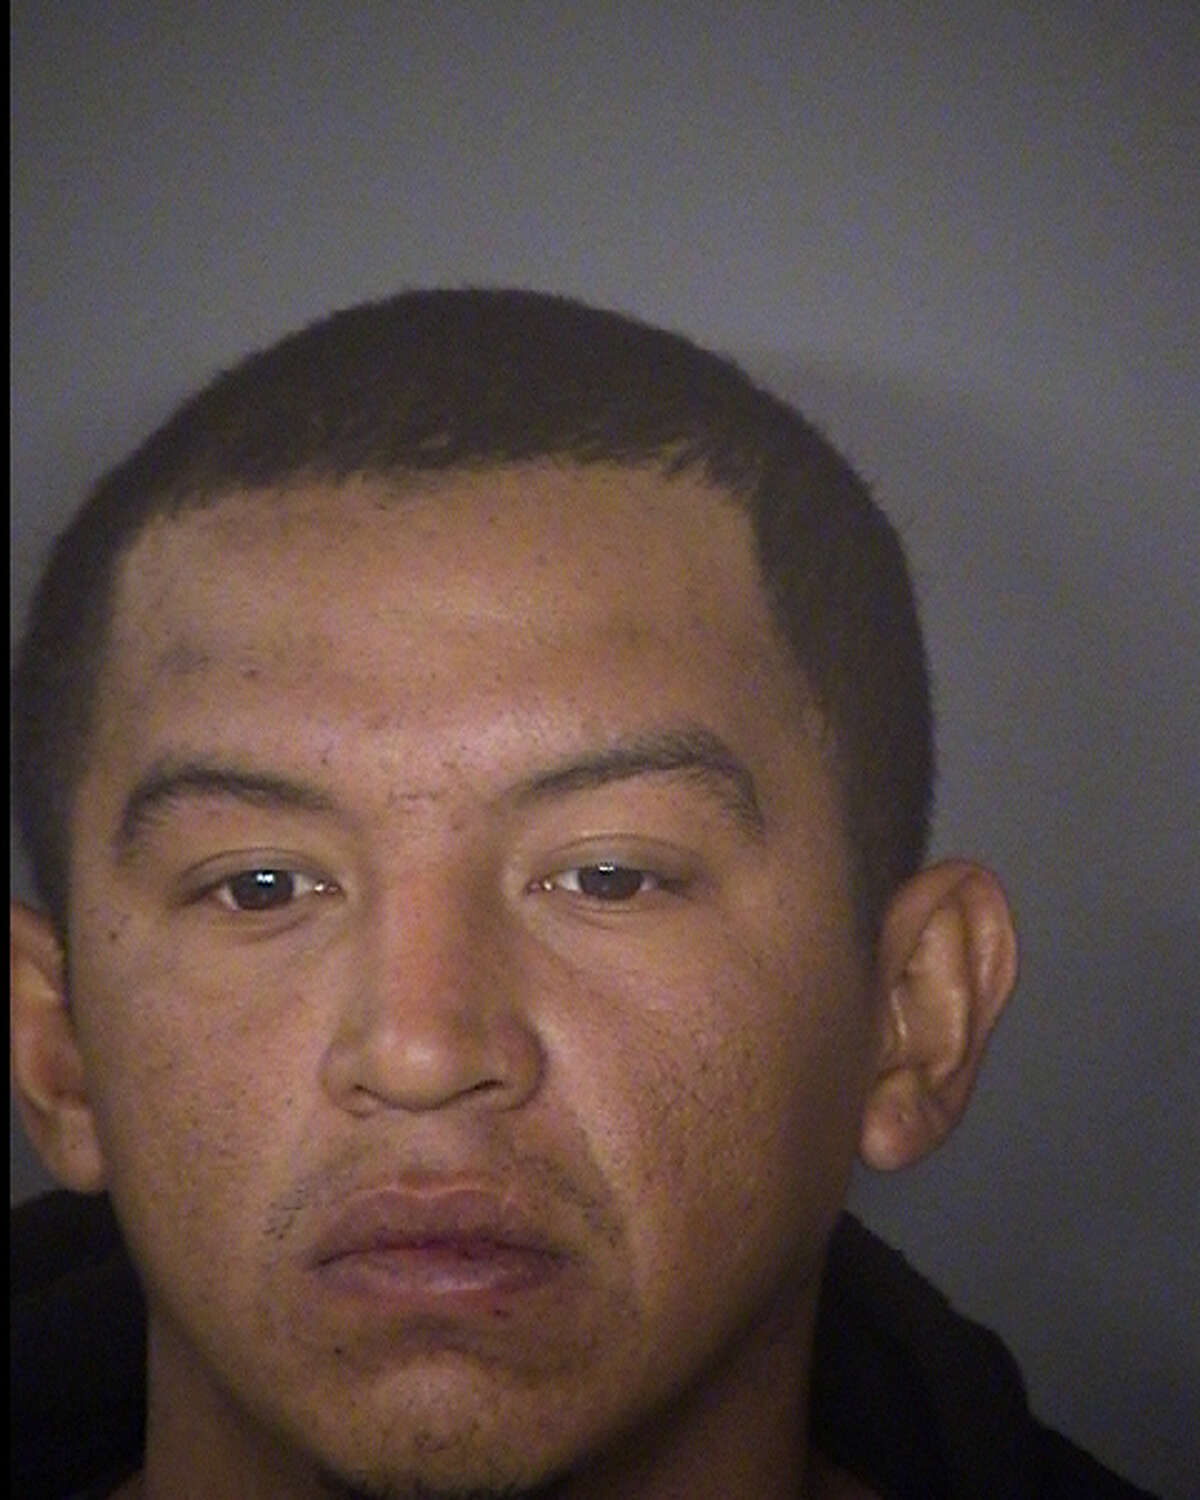 Alejandro Almazan, 25, faces one charge of intoxication manslaughter and two charges of intoxication assault. He was booked into the Bexar County Jail on a $200,000 bond. He is also being held on an ICE detainer.